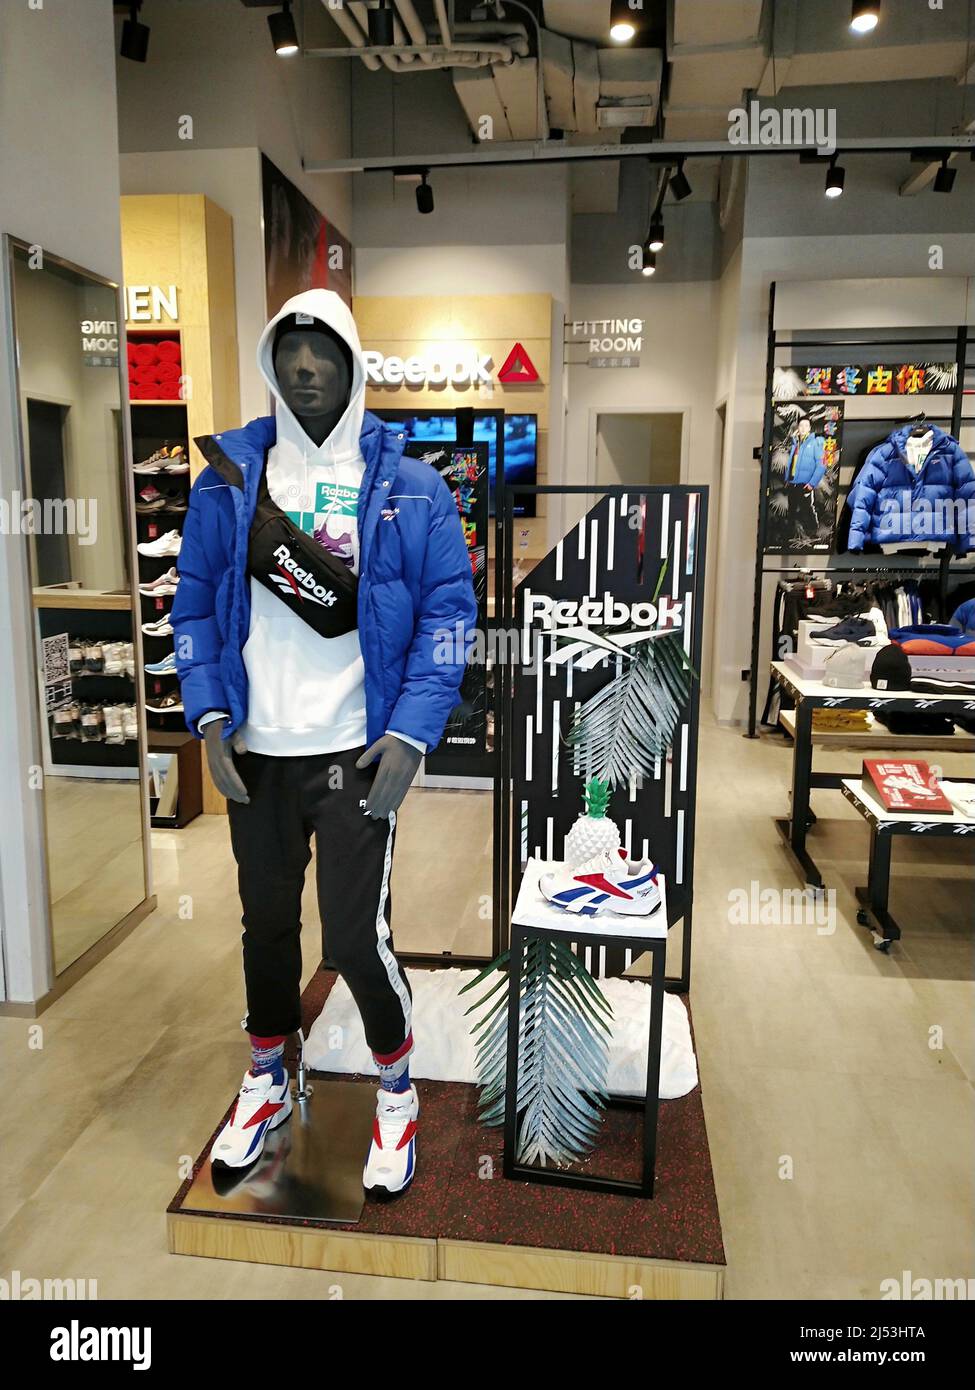 SHANGHAI, CHINA - OCTOBER 13, - Photo taken on Oct. 13, 2019 shows a REEBOK store in Shanghai, China. On 18, 2022, several consumers said they received a text message